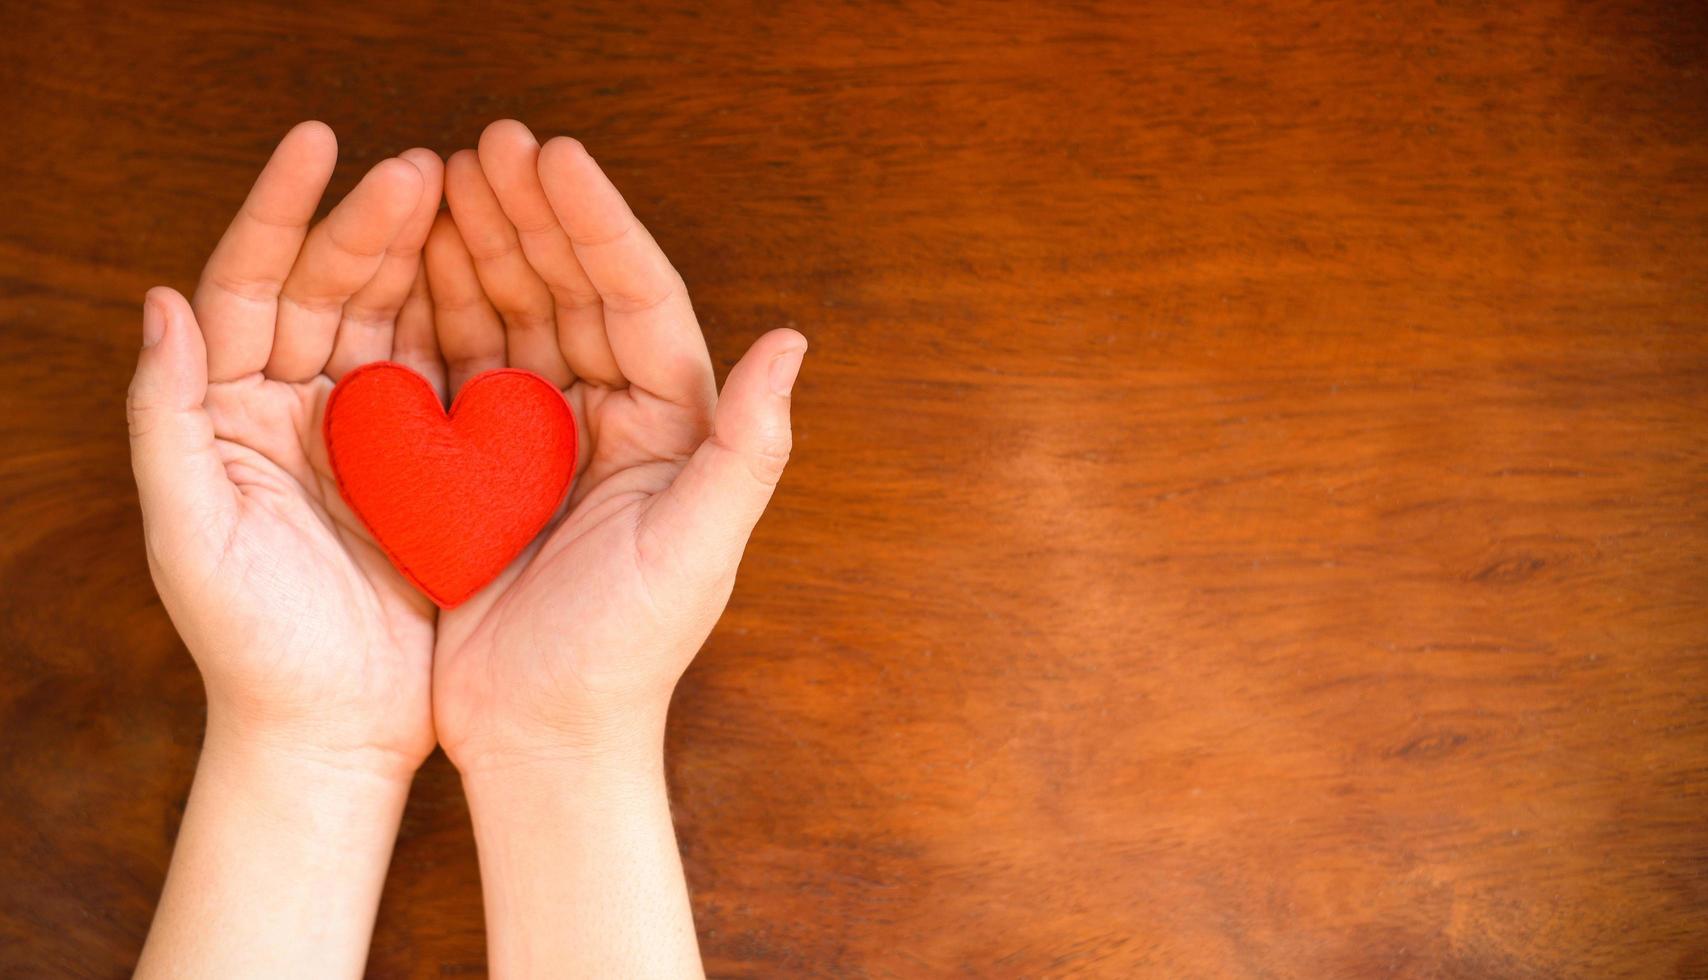 hands holding heart give love philanthropy donate help warmth take care valentines day health care love organ donation family insurance world health day hope gratitude covid-19 coronavirus relief photo